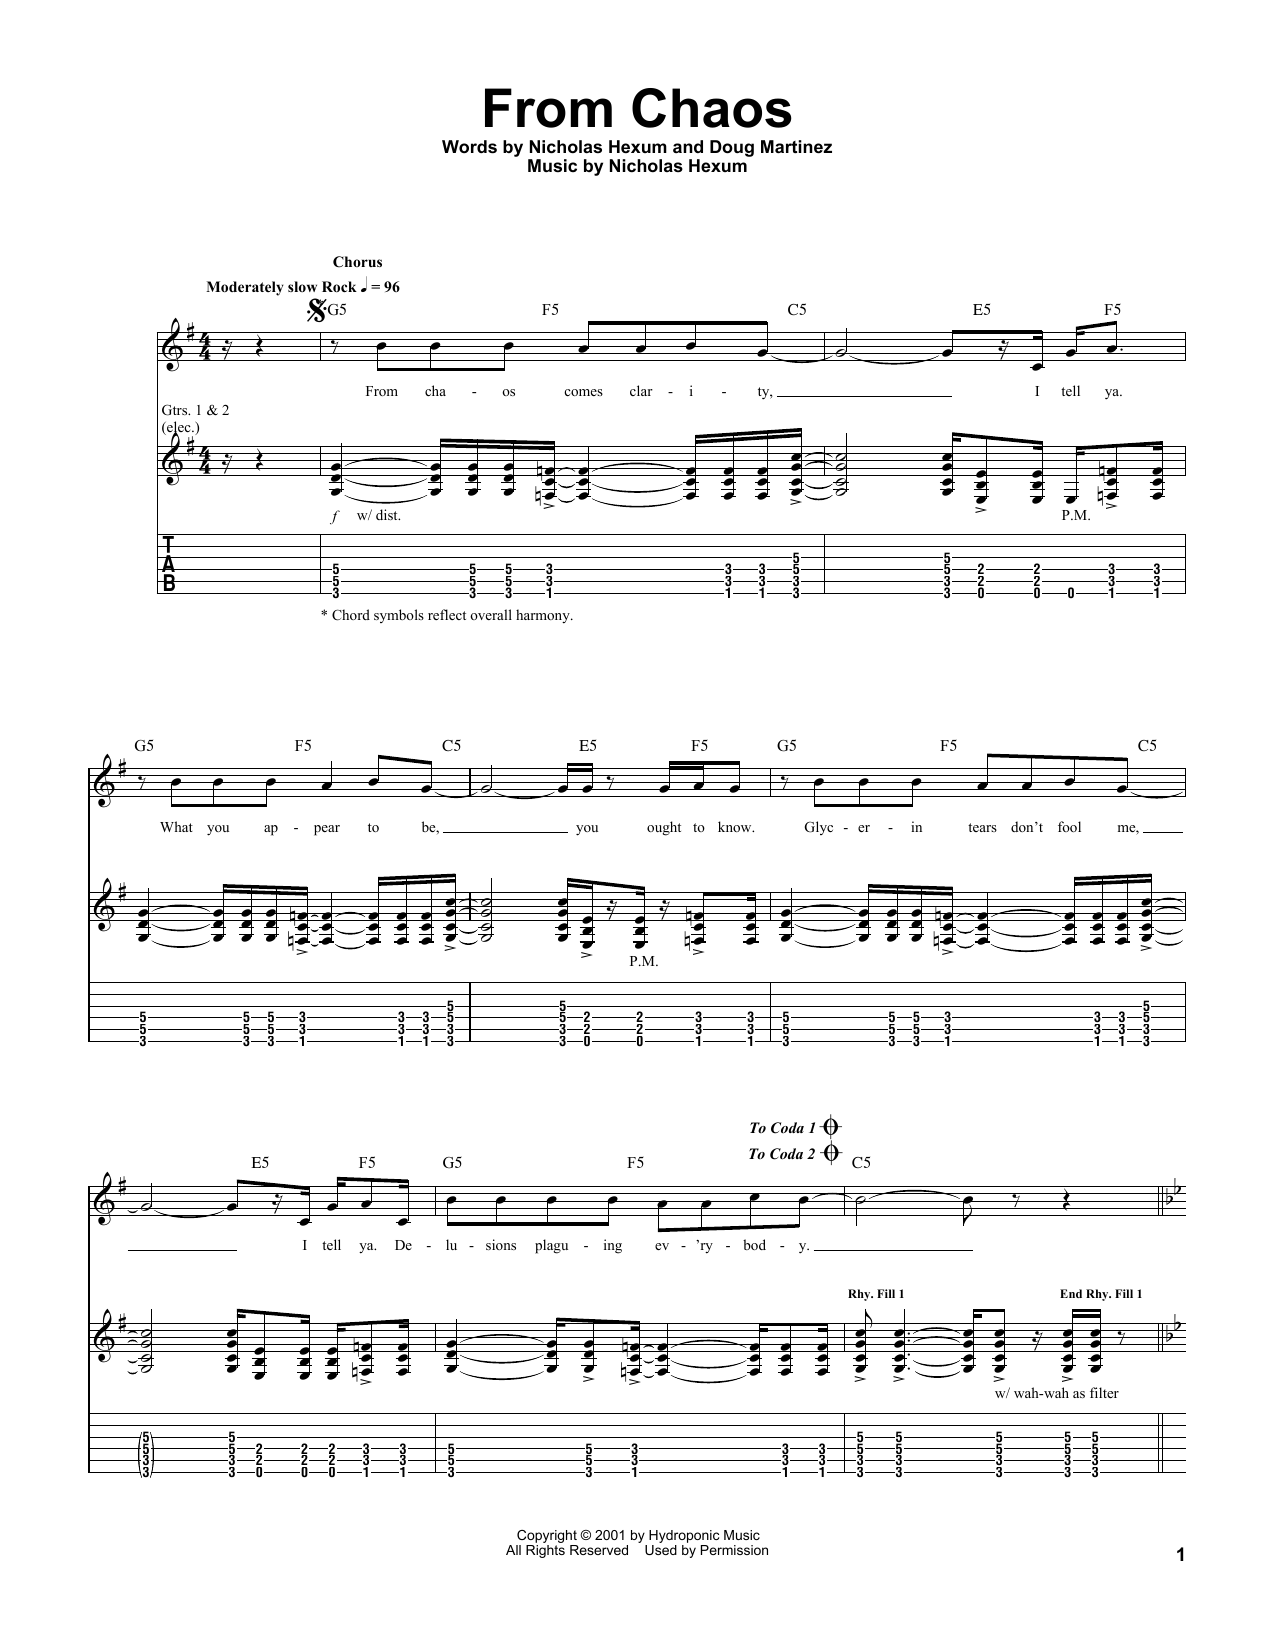 Download 311 From Chaos Sheet Music